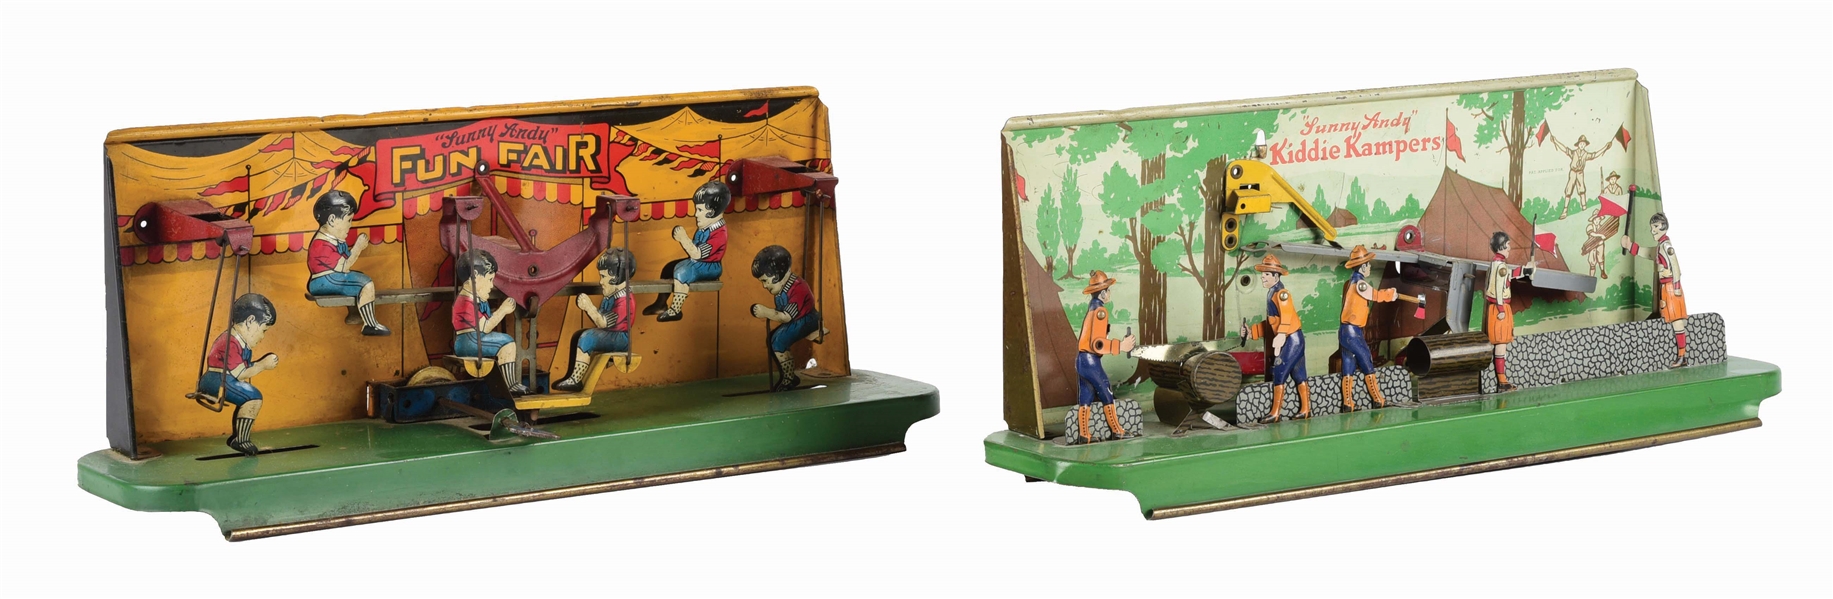 LOT OF 2: MECHANICAL SUNNY ANDY DIORAMAS.